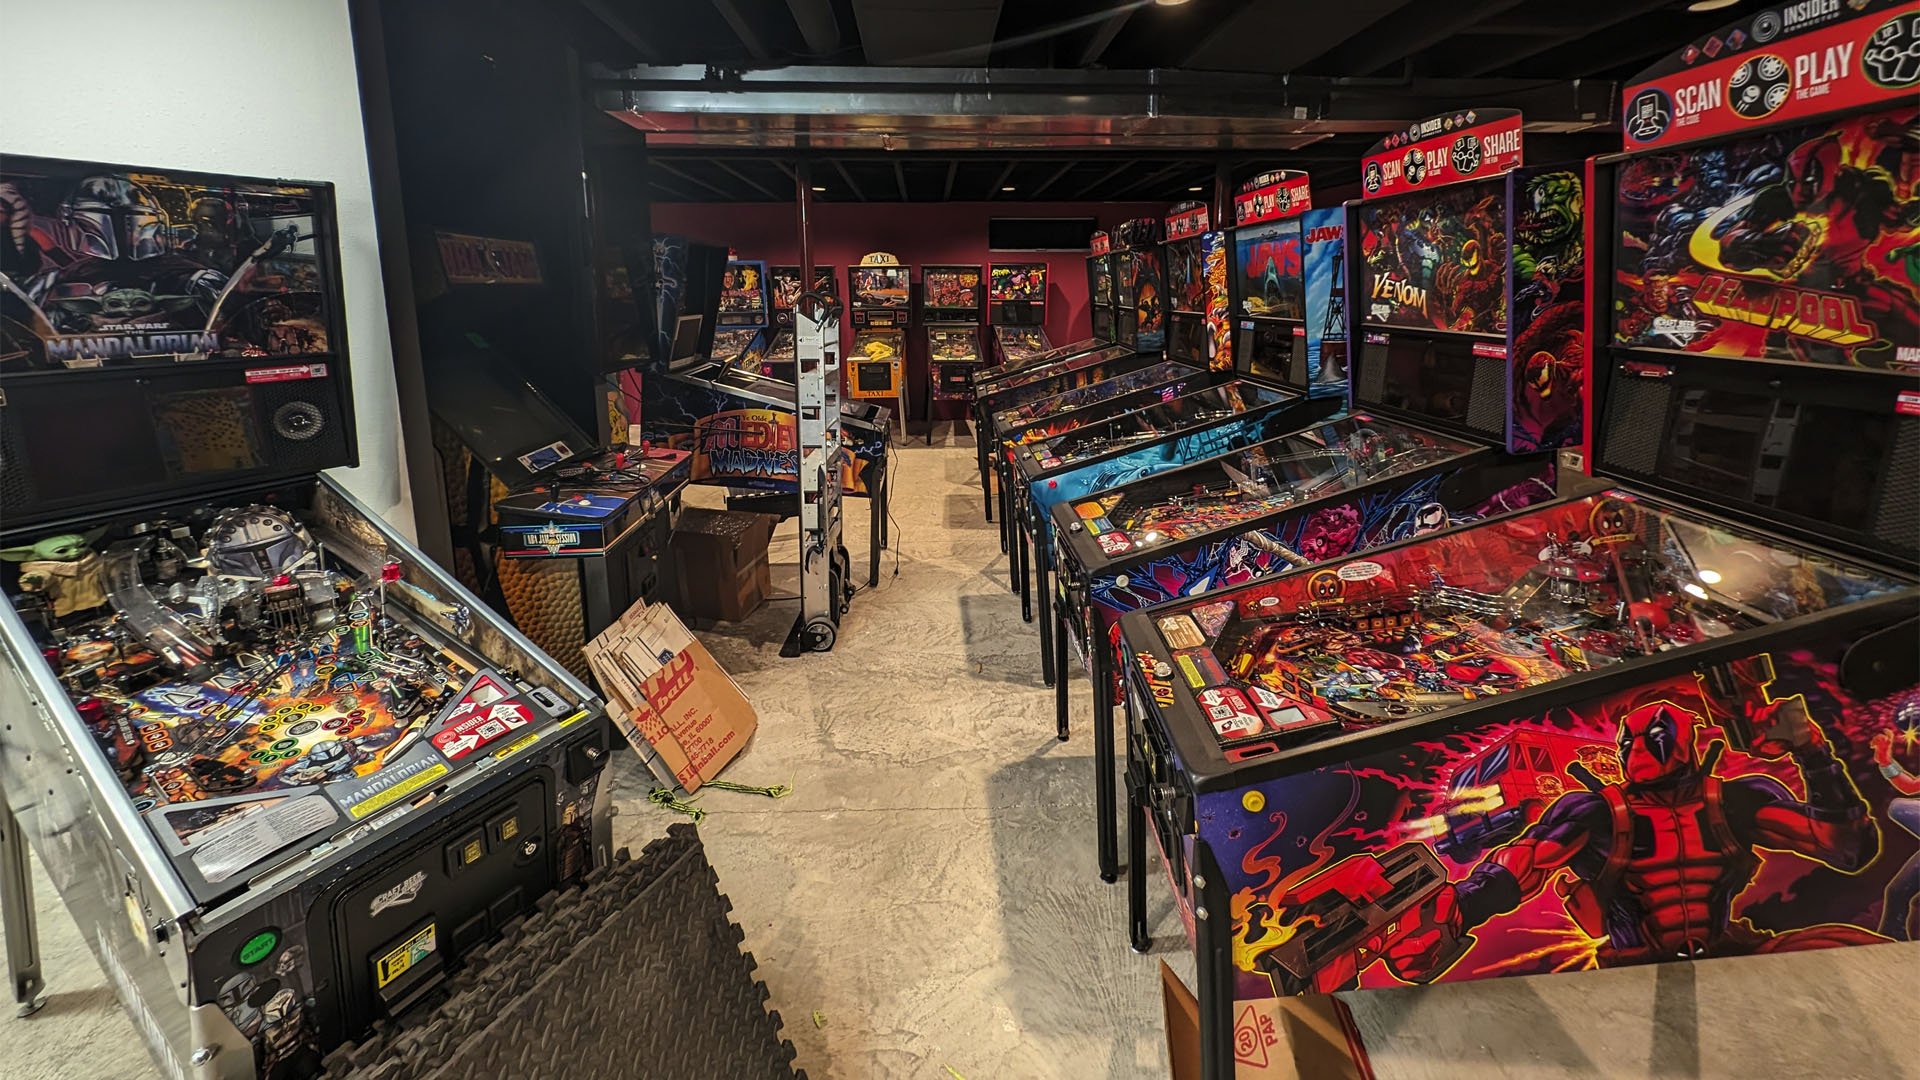 pinball tables in a basement